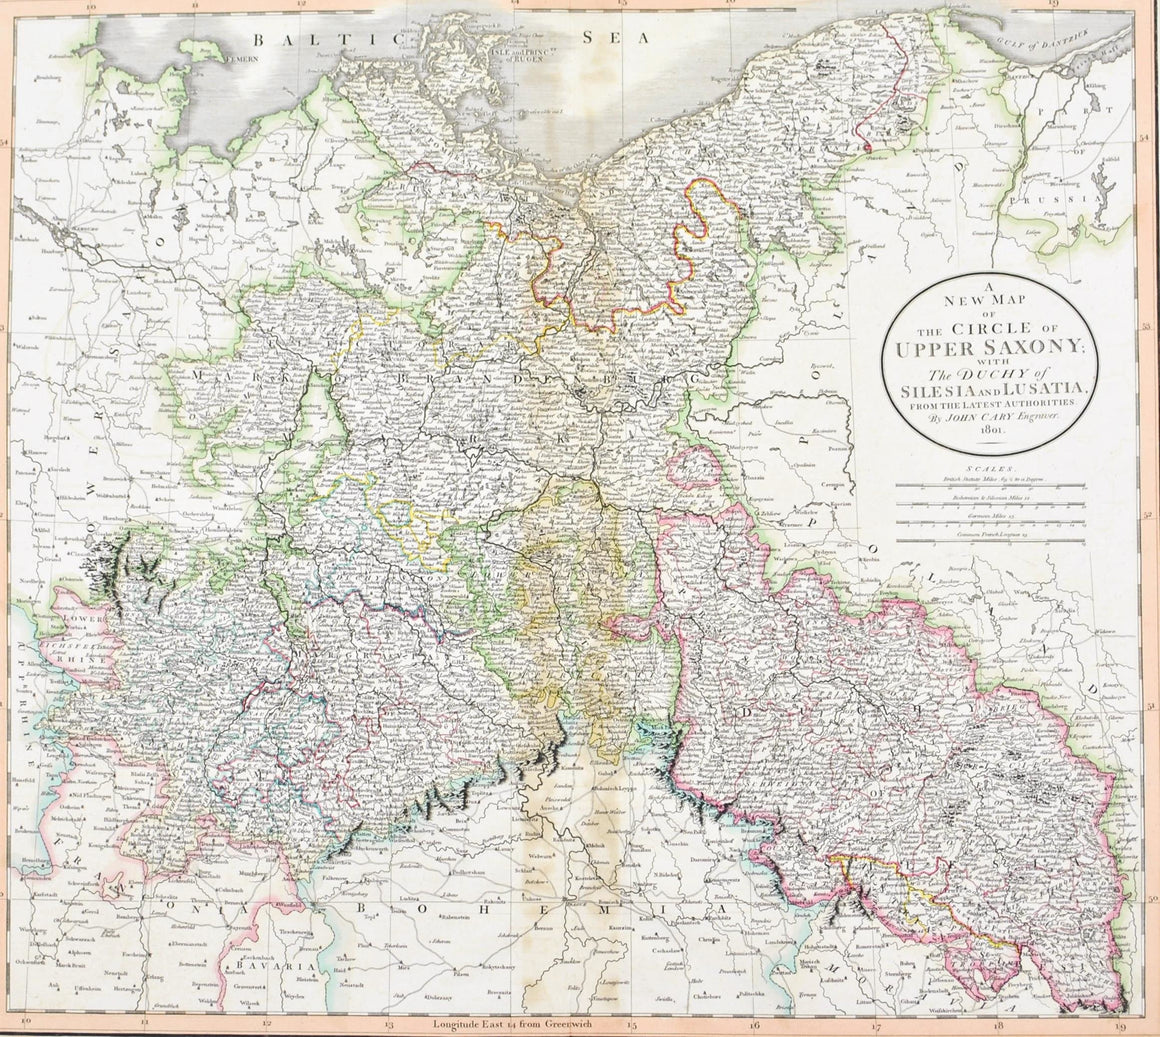 1808 A New Map of the Circle of Upper Saxony - Cary